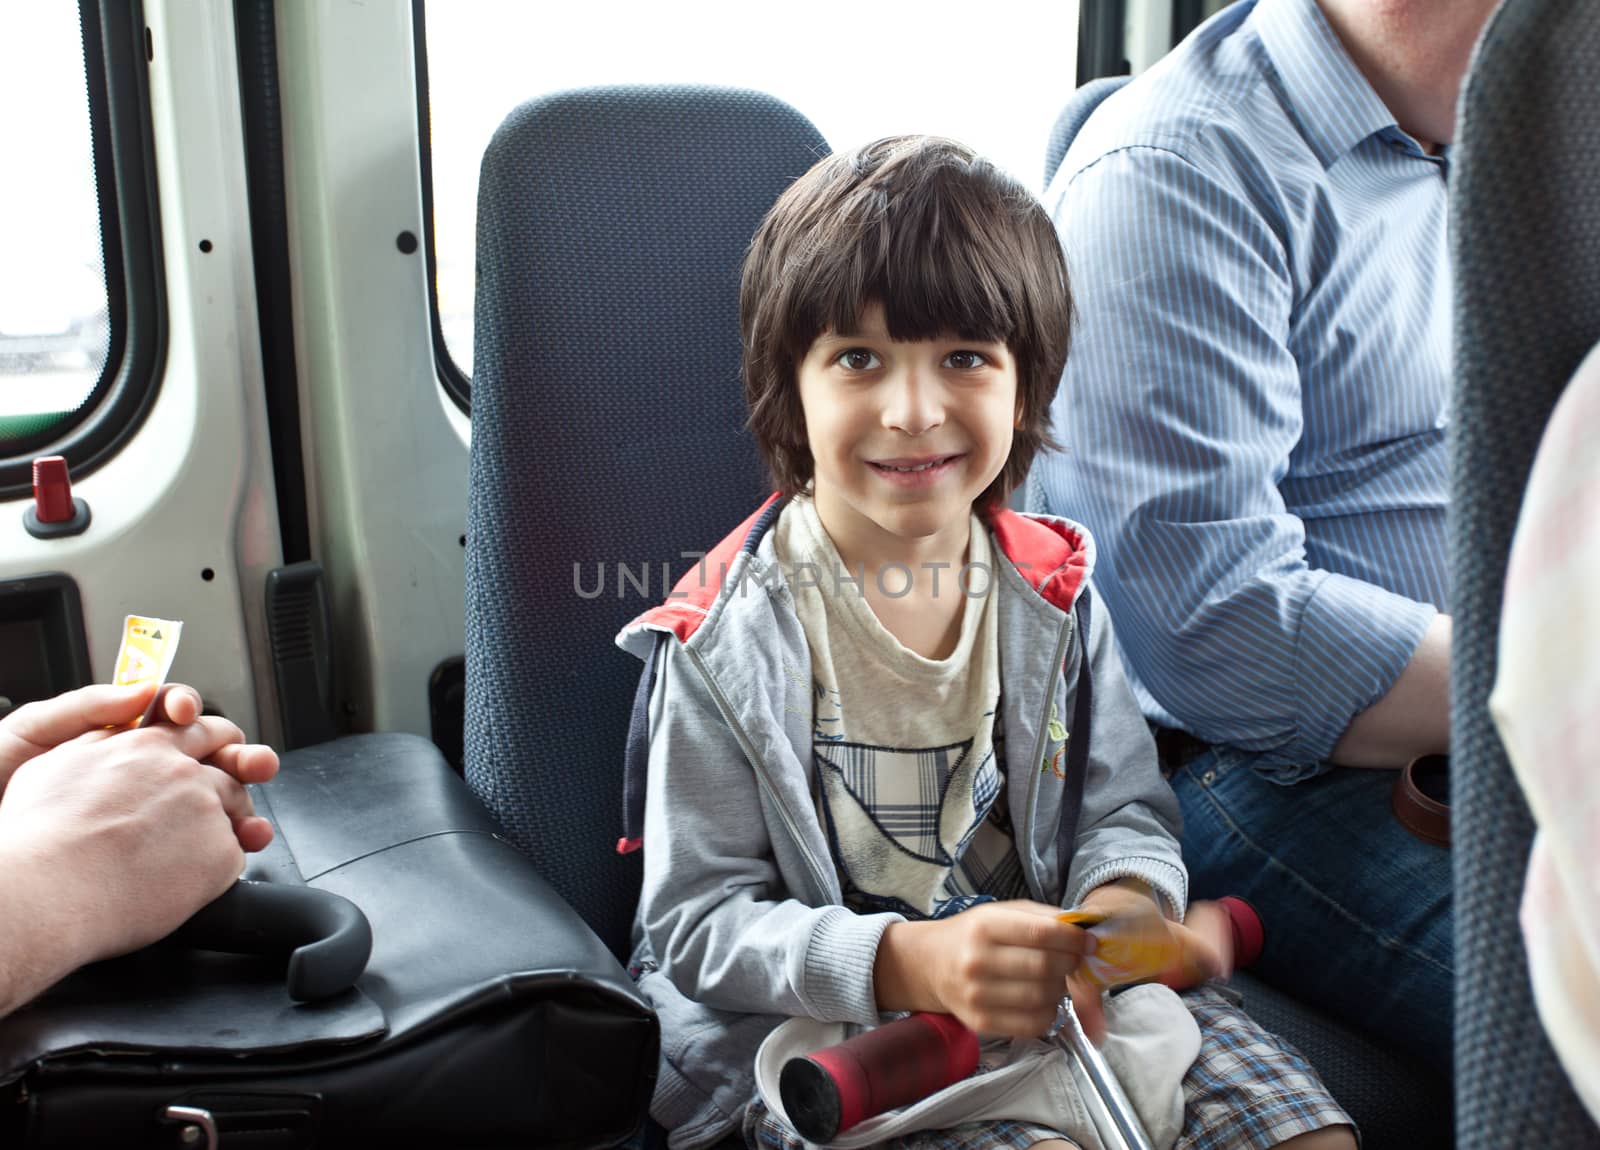 child in a public transport by Astroid